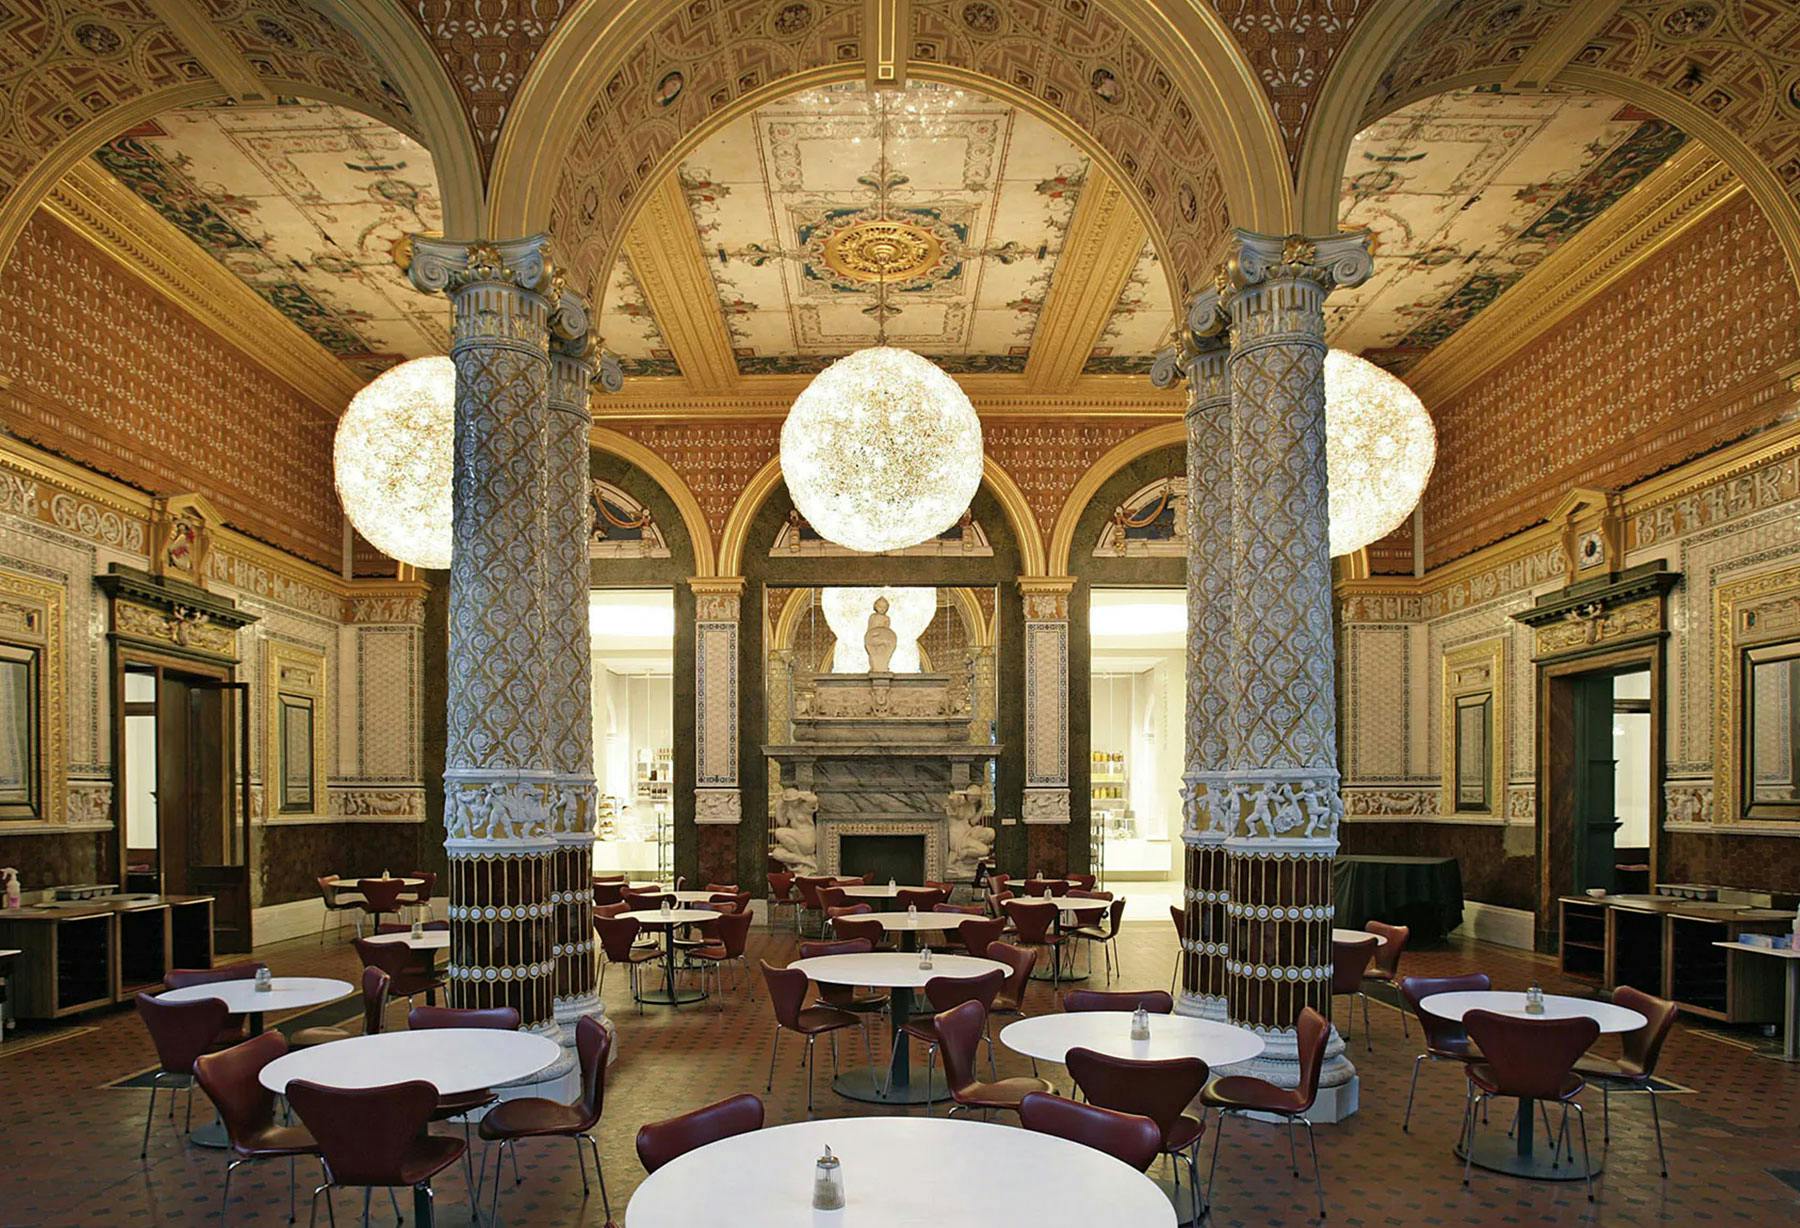 <p>©V&amp;A Images/Victoria and Albert Museum/Galleries 12 to 16, Morris, Gamble and Poynter Rooms/Designed by MUMA/Lighting by Catellani And Smith / The restaurant-cafeteria of the prestigious Victoria &amp; Albert Museum in London, the largest art and design museum in the world, is illuminated by 4 special Fil de Fer lights with a diameter of 2 metres, perfectly fitting into the style of the museum, which is characterized by modern design and quality craftsmanship.</p>
